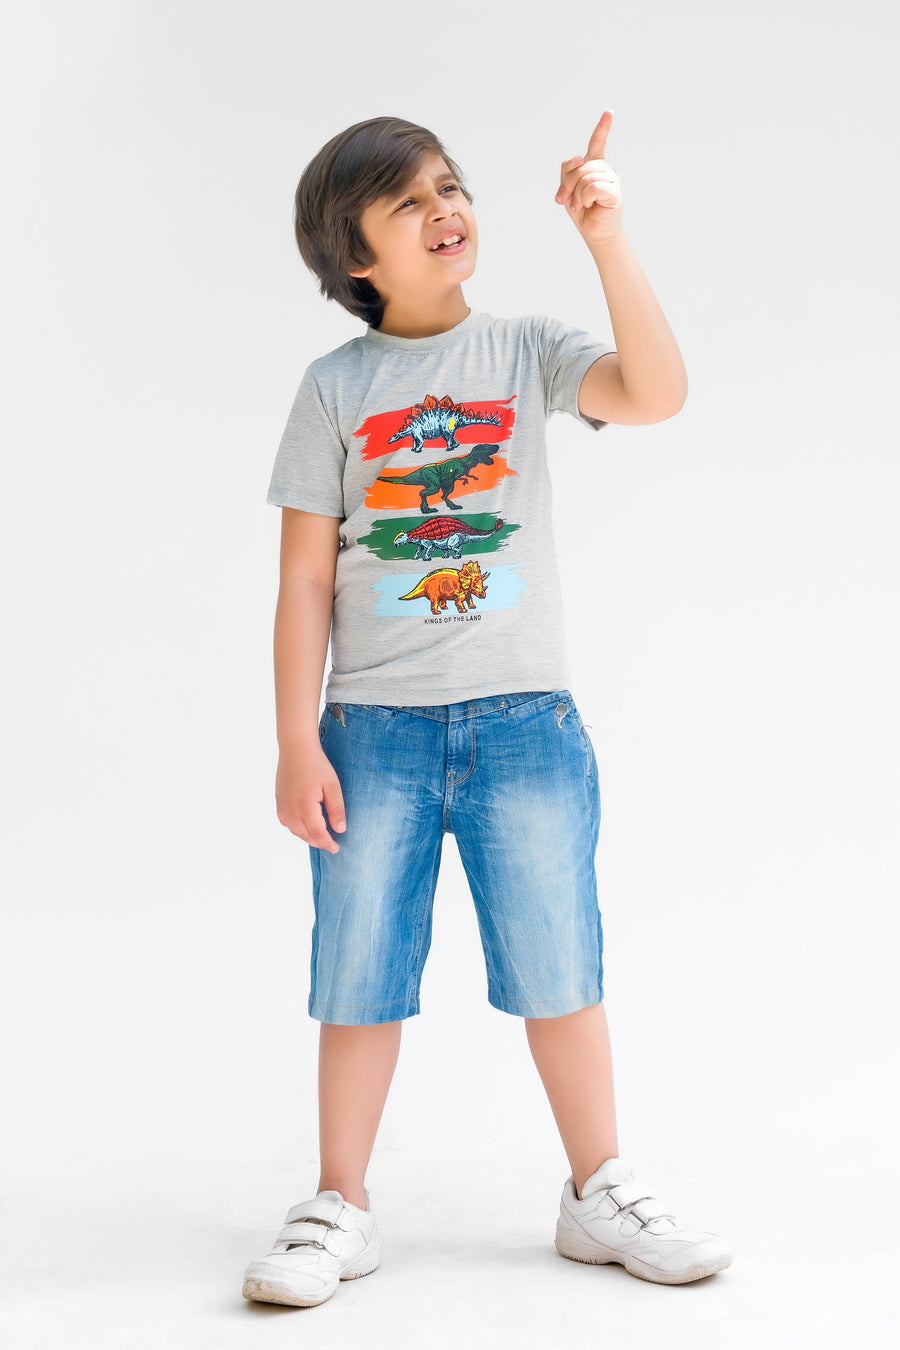 Kings of the Land Half Sleeves T-shirts for Kids - Grey